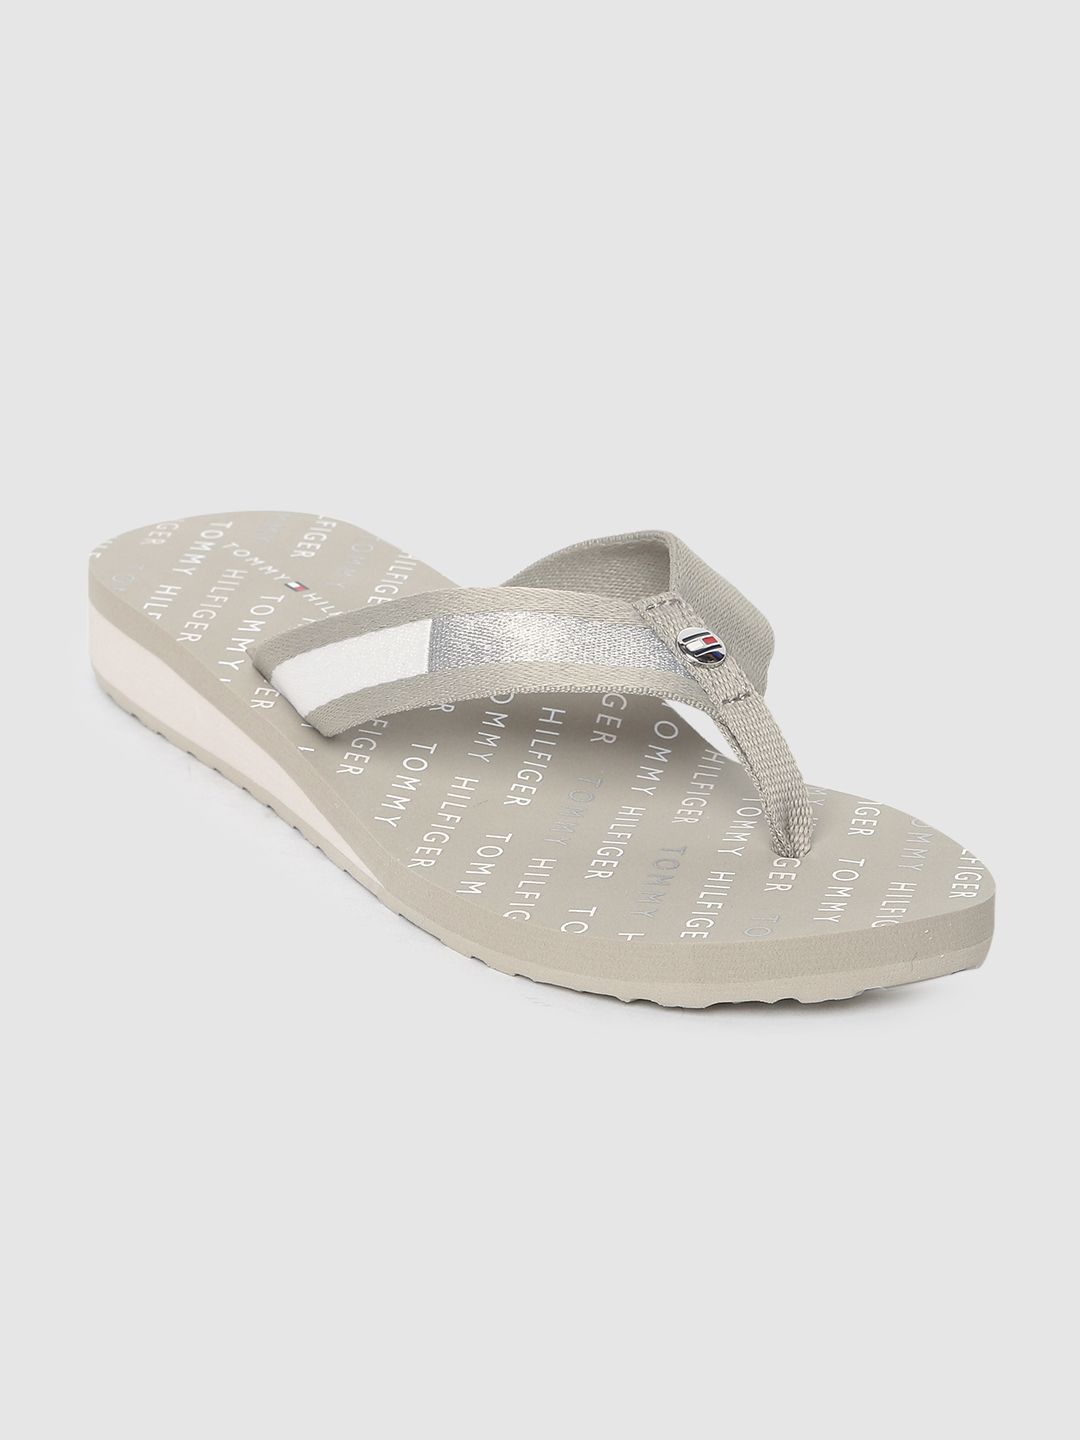 Tommy Hilfiger Women Grey Printed Thong Flip-Flops Price in India